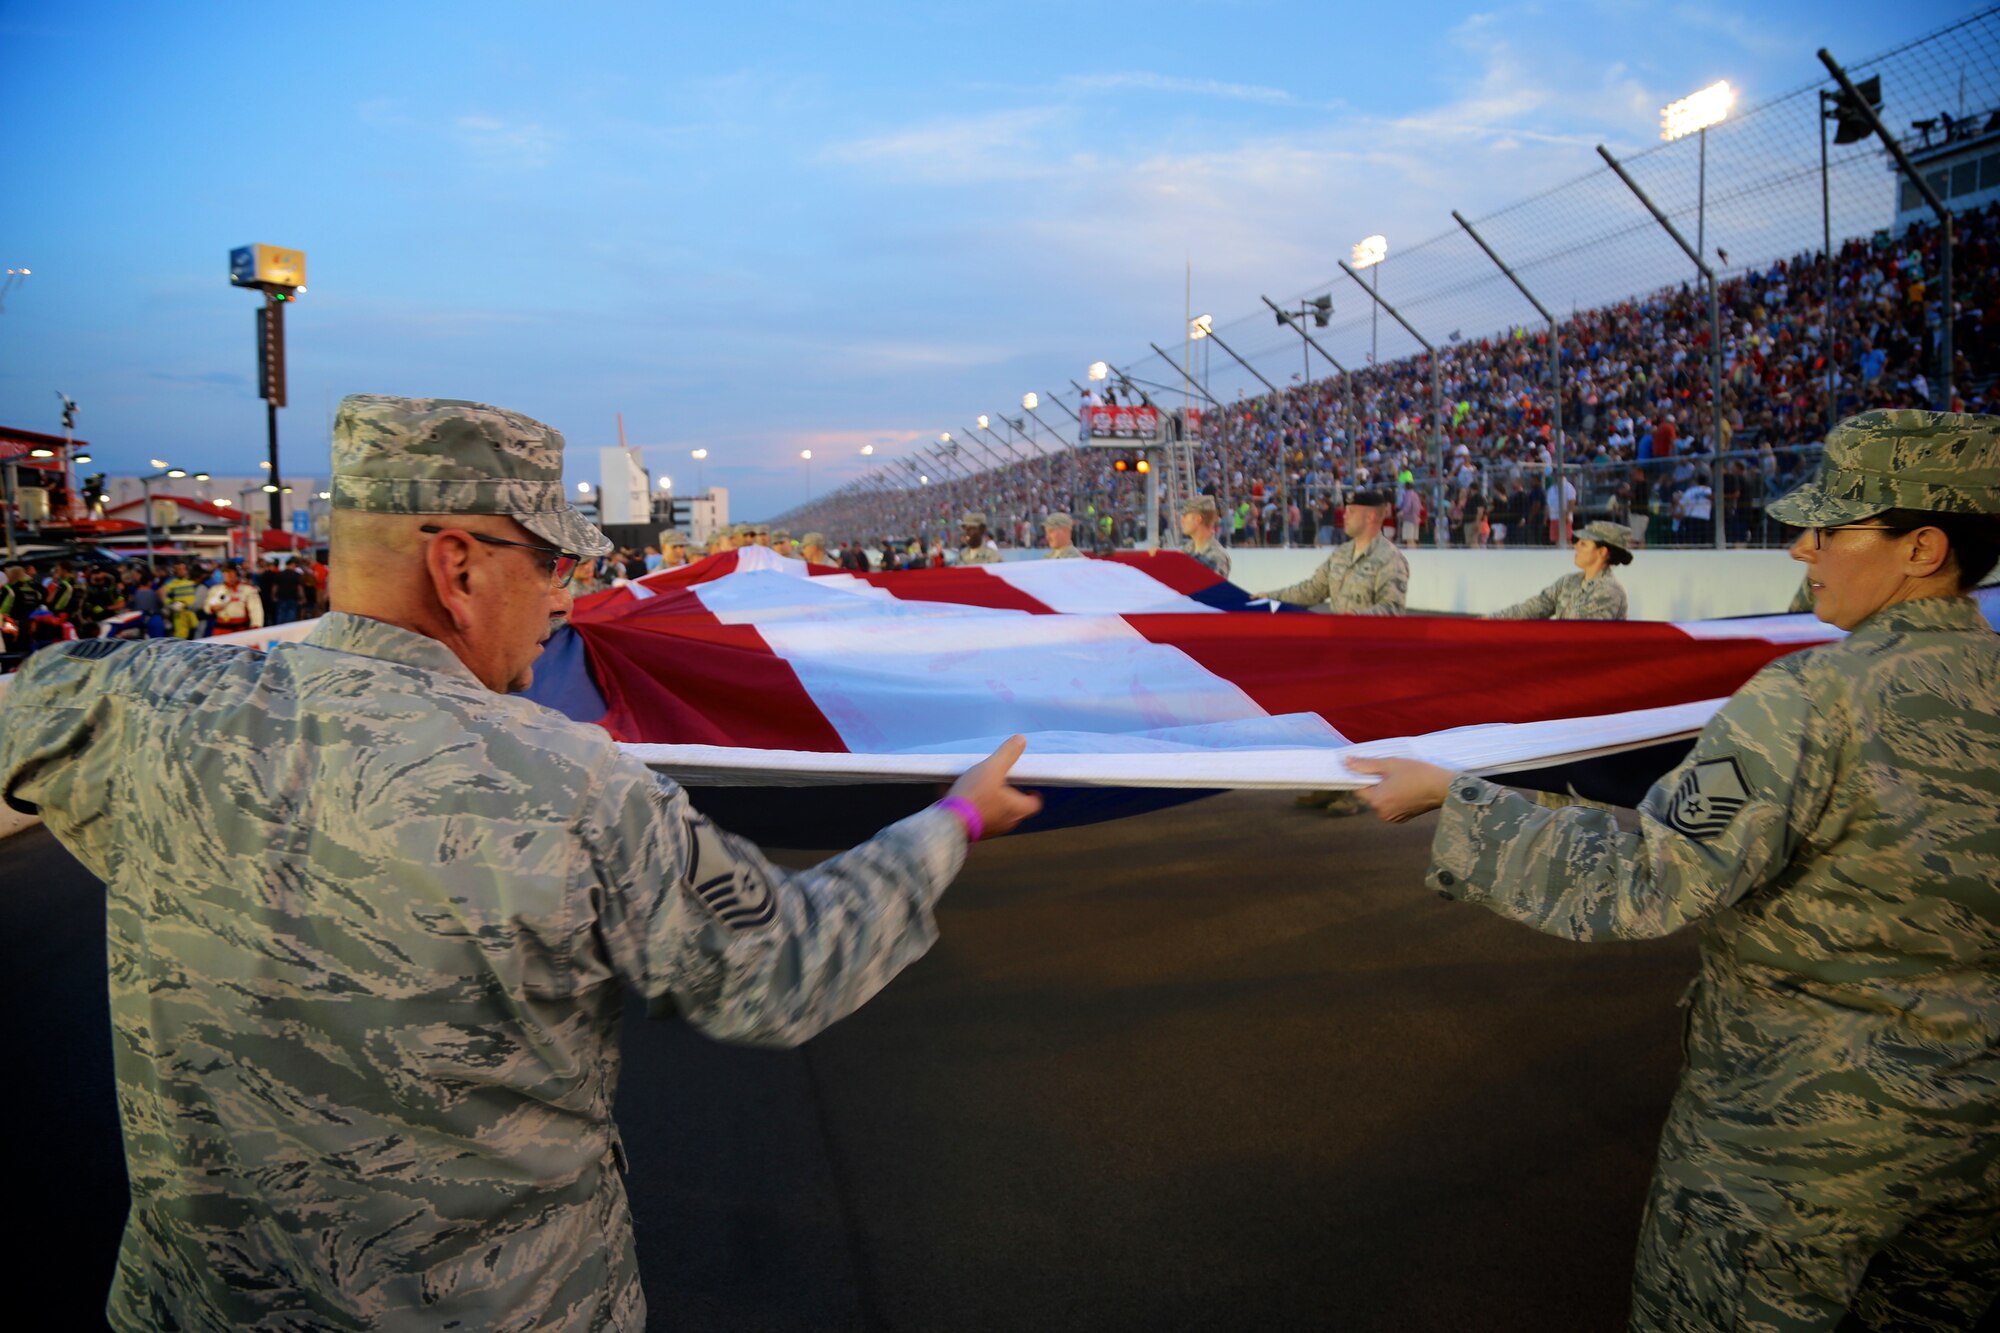 Master Sgt. Gerald Sonnenberg and Master Sgt. Karen Ridge unroll the American flag for the national anthem at Gateway track recently.  As part of the event, 932nd Airlift Wing Maintenance Group commander, Col. Sharon Johnson, was recognized to the crowd on stage with the Indy drivers at the Bommarito Automotive Group 500 Aug. 25, 2018, Gateway Motorsports Park, Madison, Illinois. Johnson was an honored VIP to help kick off the 2nd annual IndyCar race which was won by Will Power, taking the trophy by winning the 248-lap race around the four-turn, 1.25-mile Gateway Motorsports Park oval-paved track in Madison, Illinois.  Power accomplished the win in his #12 Chevrolet by 1.3117 seconds over second place finisher Alexander Rossi.  The 932nd Airlift Wing was represented by maintenance, medical, public affairs staff and operations personnel.  (U.S. Air Force photo by Lt. Col. Stan Paregien